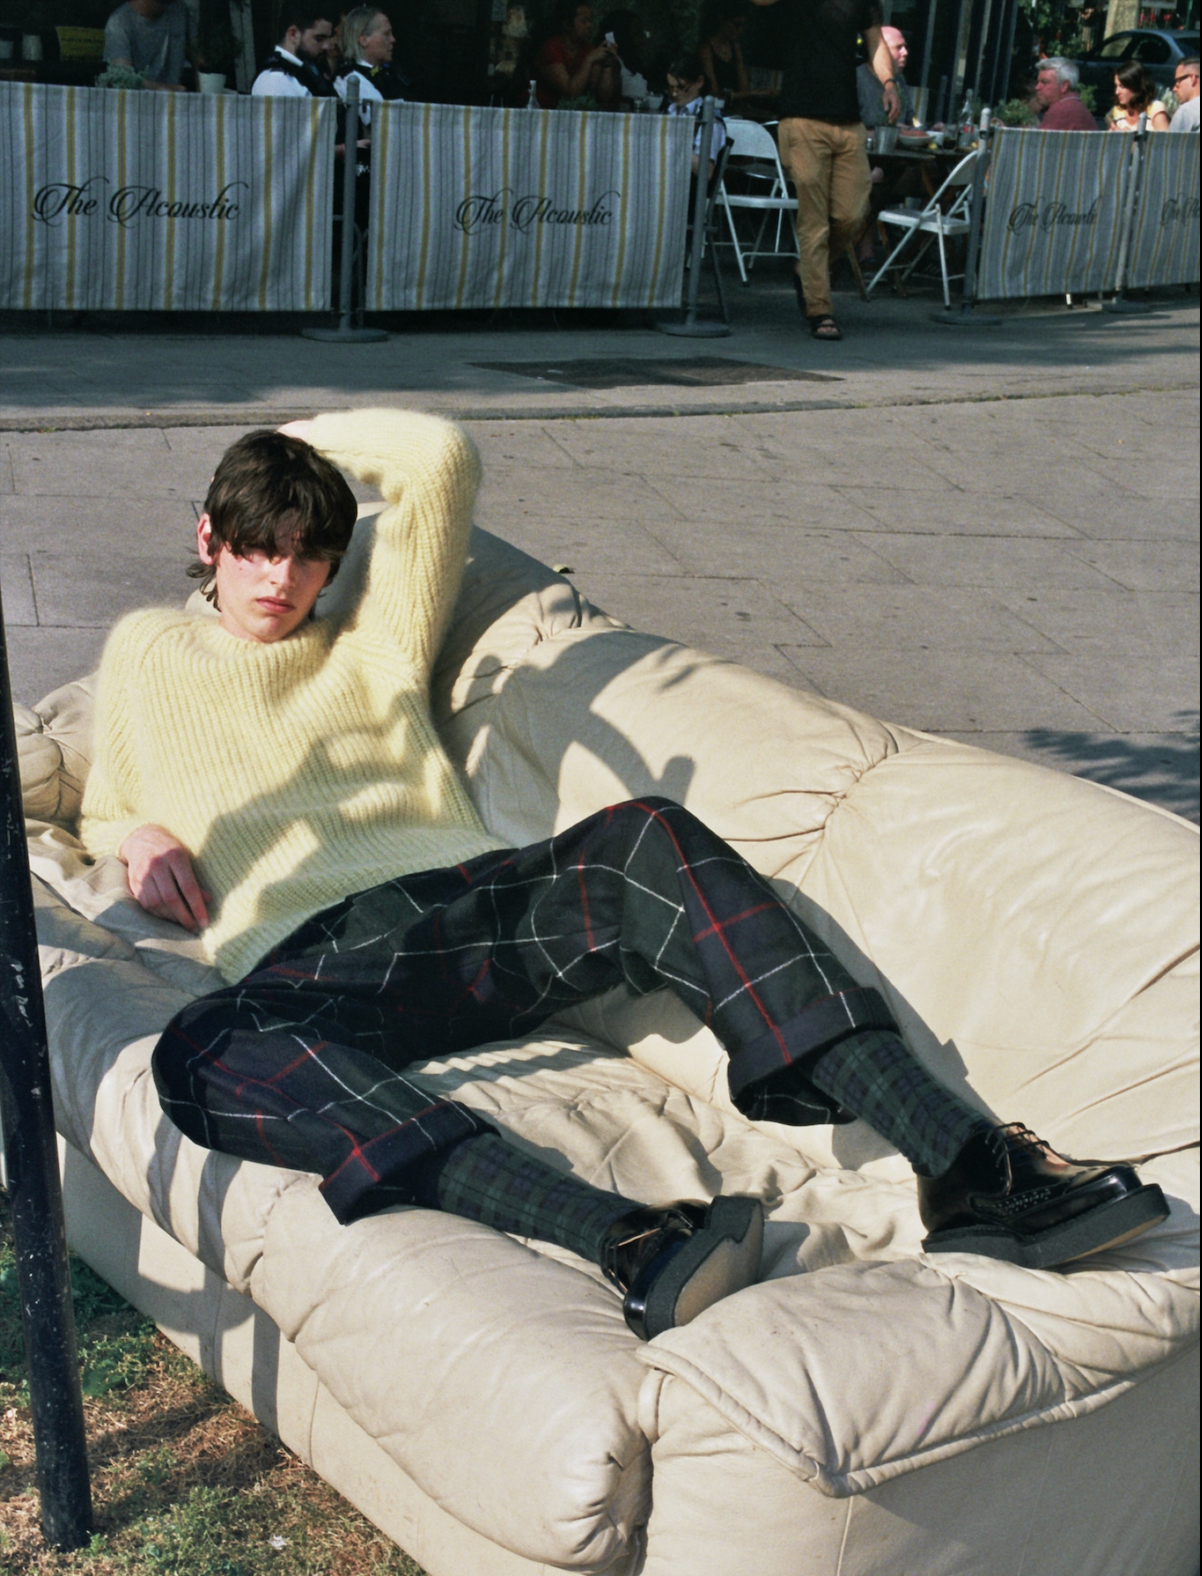 Alistair Waterfield lounging on a discarded sofa wearing black Diano Creepers